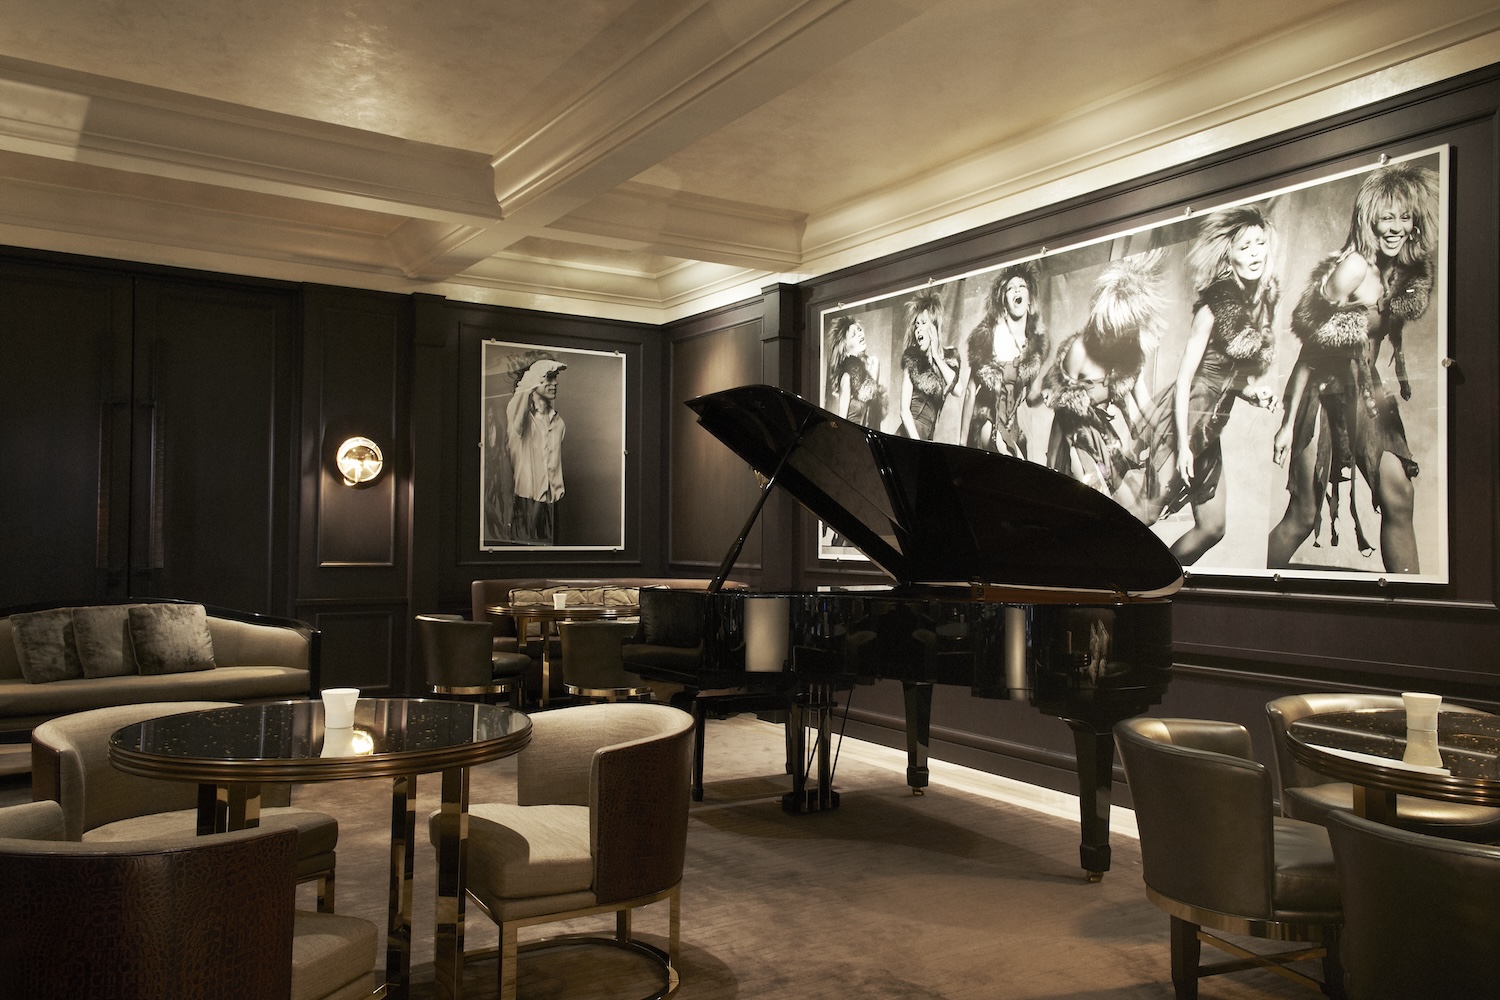 black and white photos of Tina Turner, black grand piano, silver seats and tables